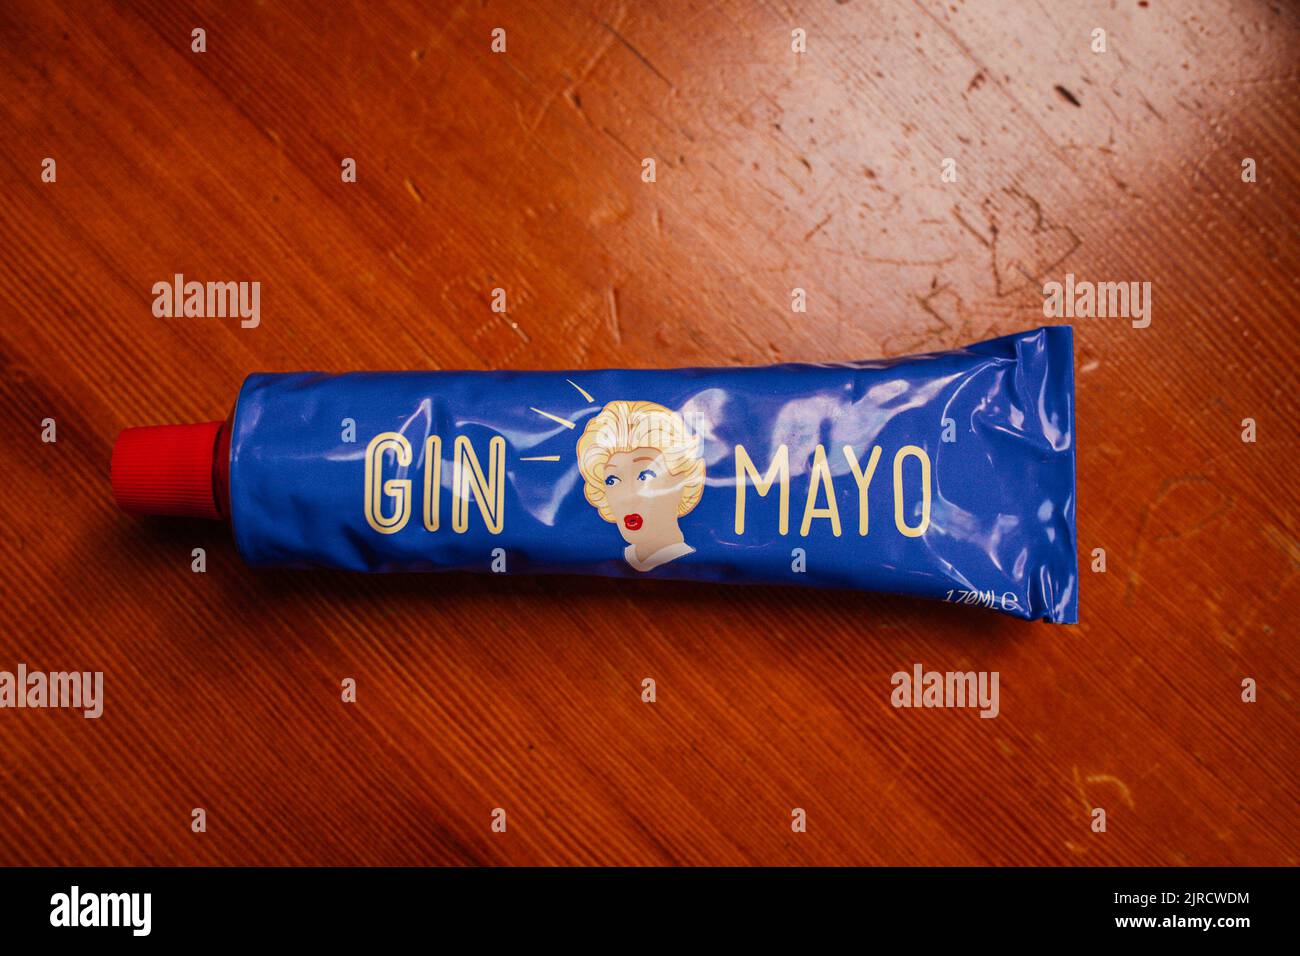 a bright cobalt blue tube of Gin Mayo, a Dutch mayonnaise flavored with Gin Stock Photo